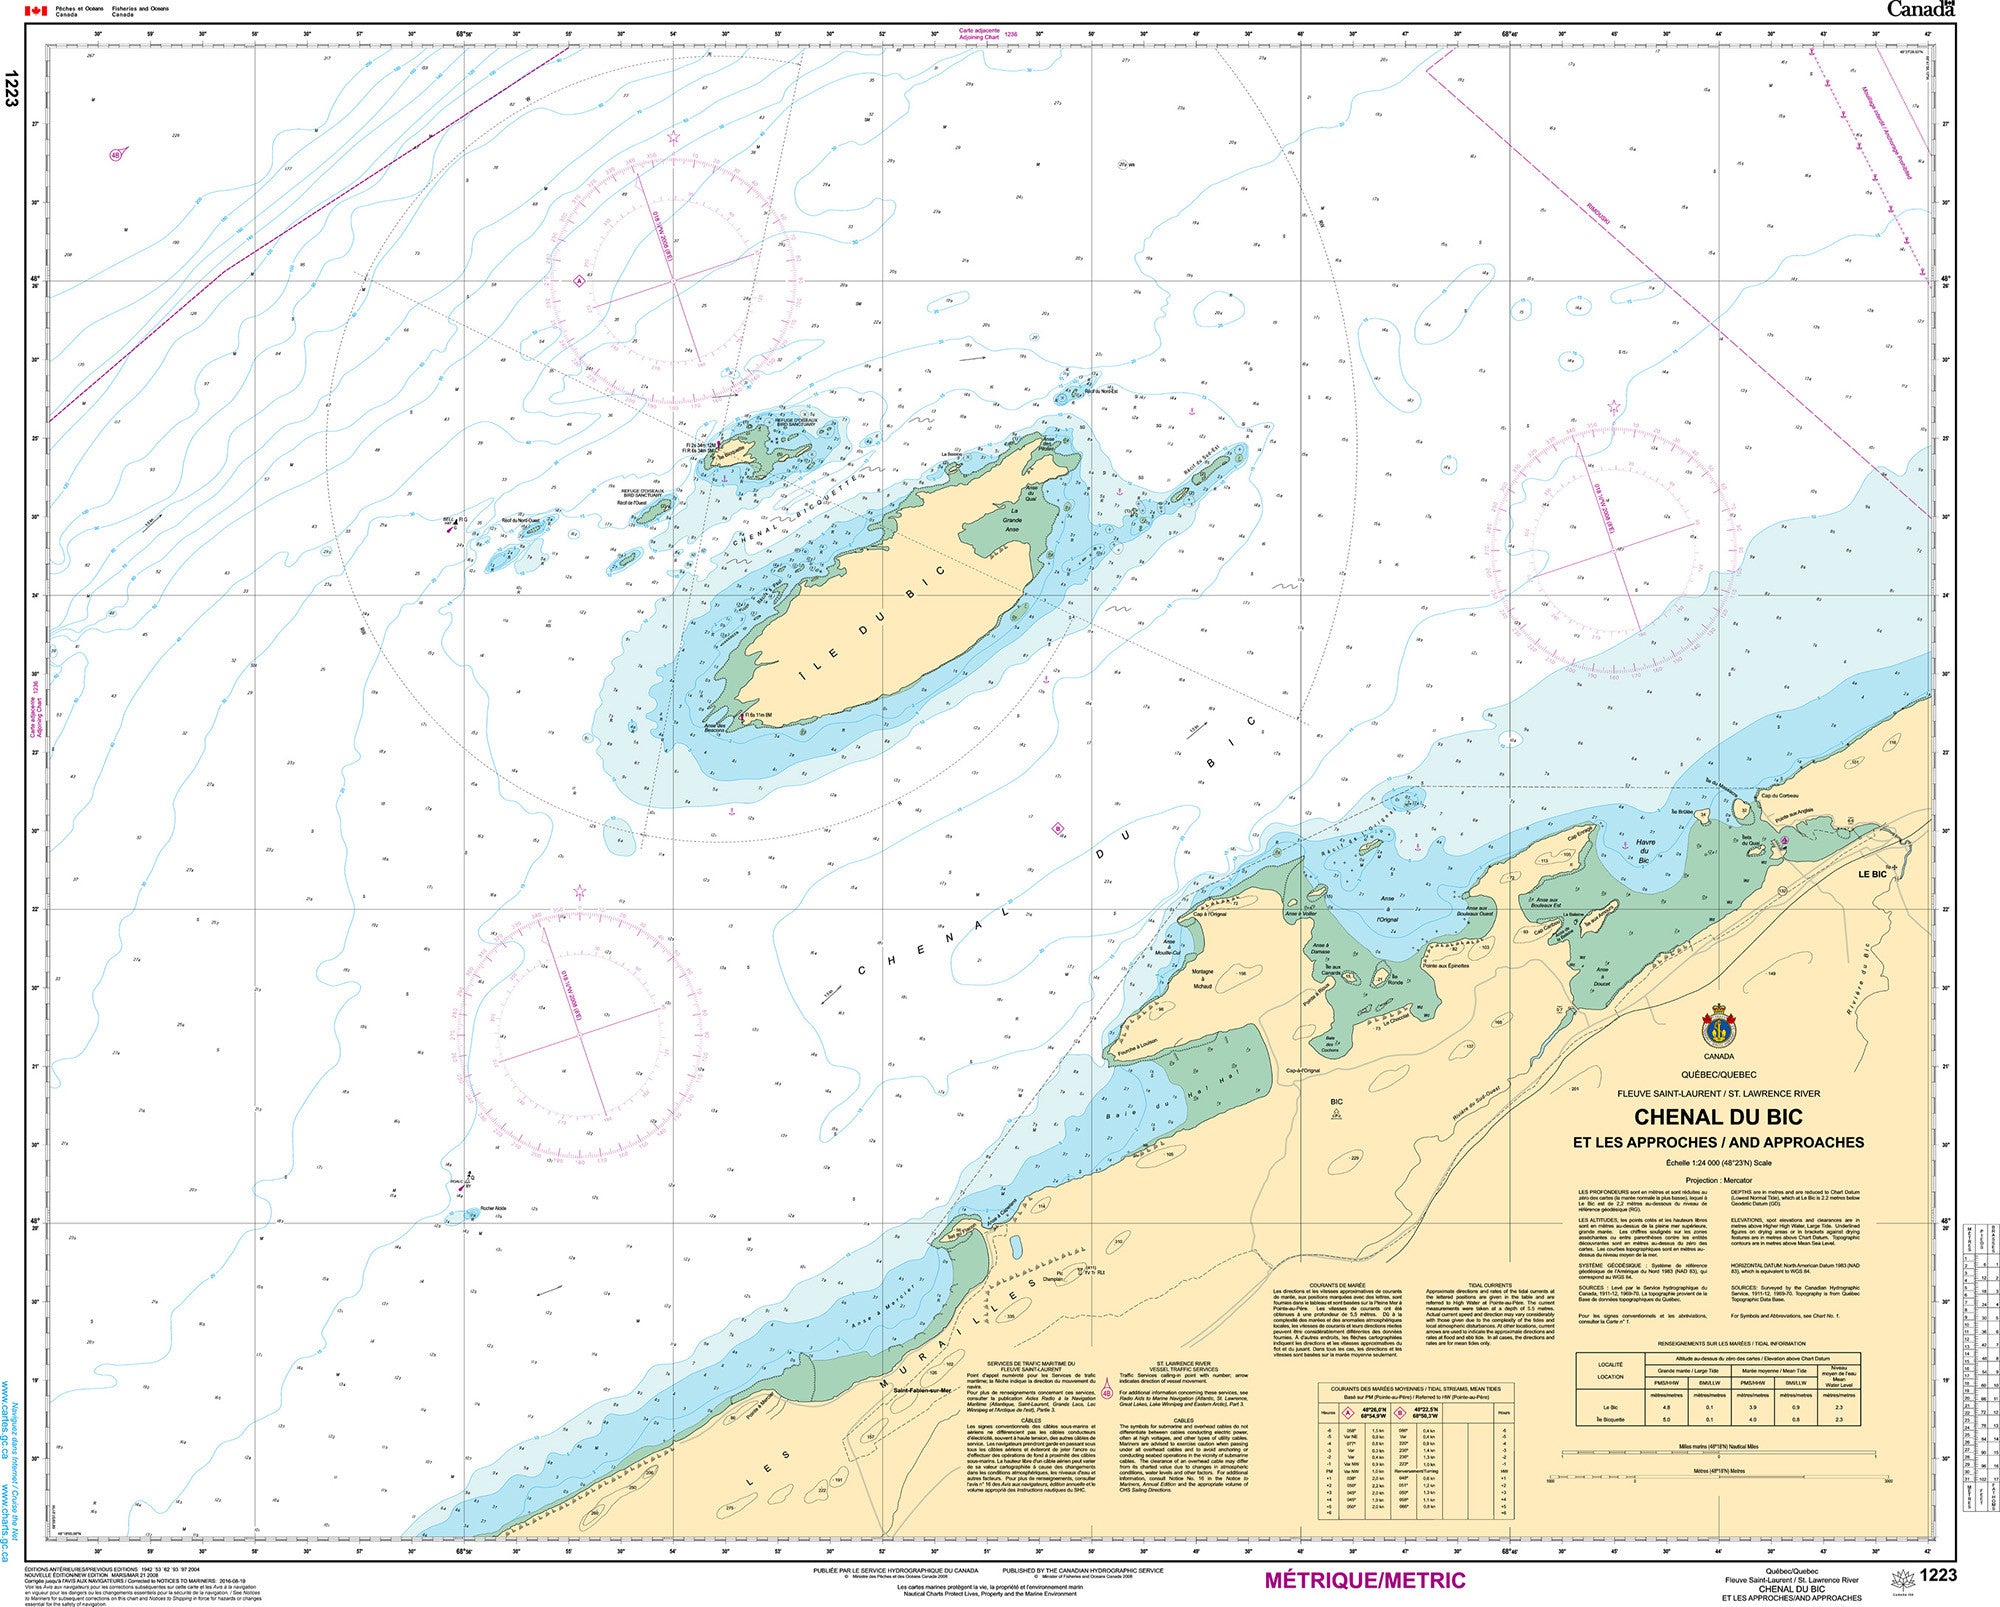 Canadian Hydrographic Service Nautical Chart CHS1223: Chenal du Bic et les approches/and approaches